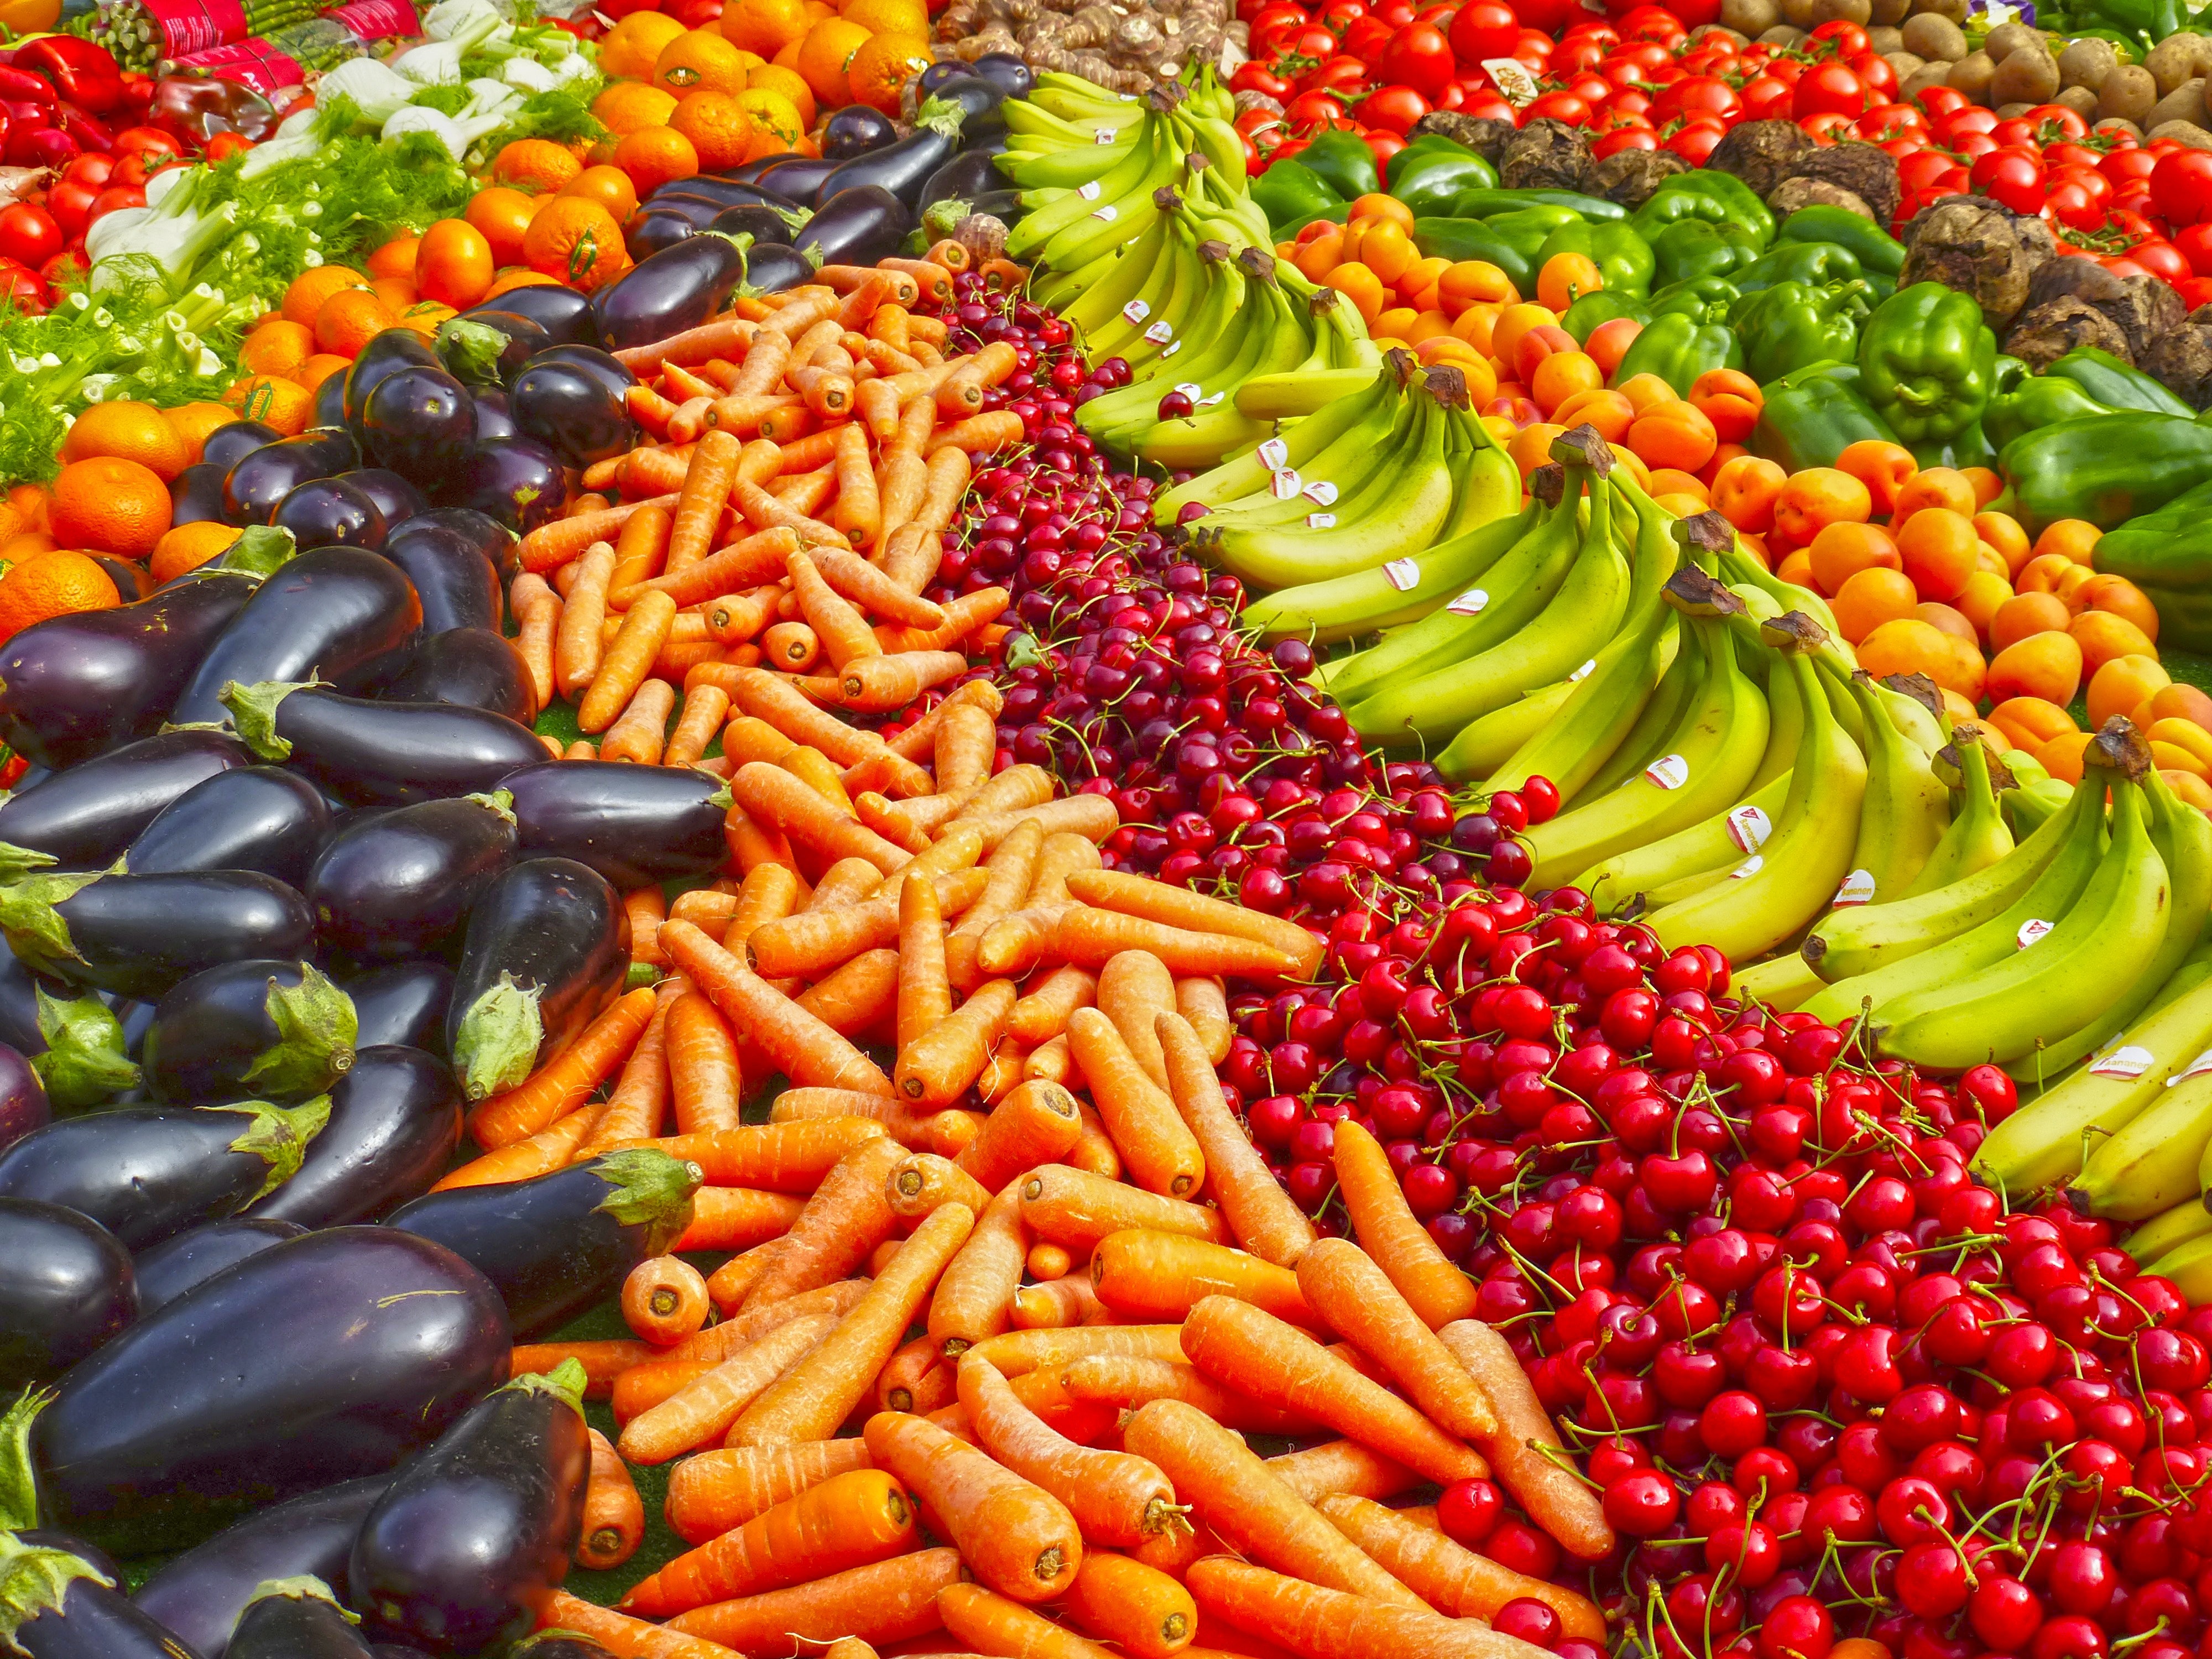 rows of different colored fruits and vegetables